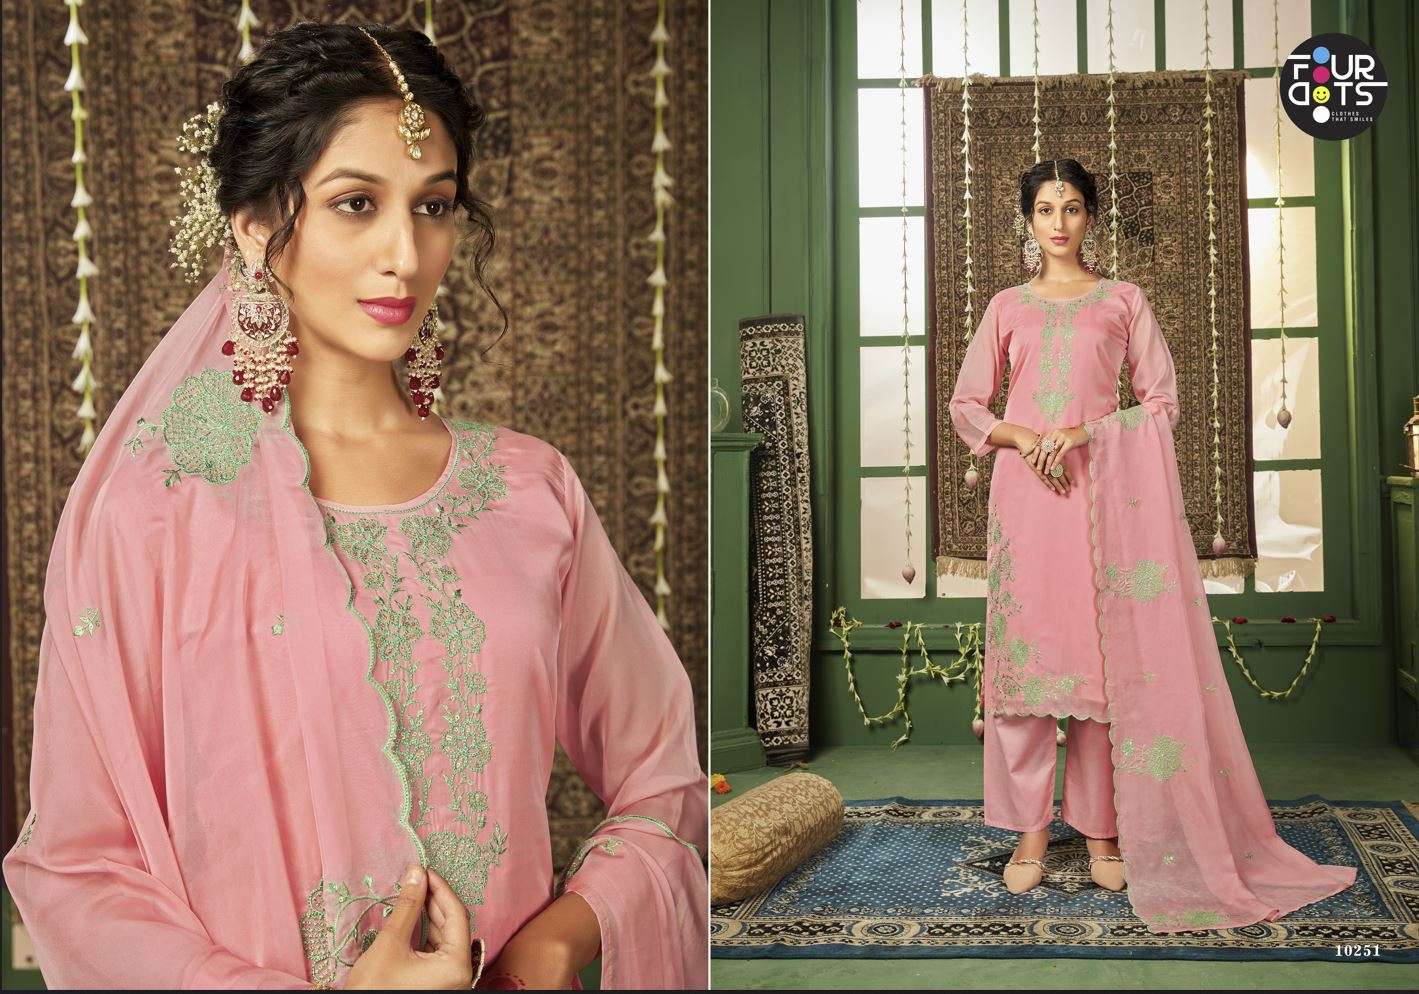 Navya By Four Dots 10251 To 10254 Series Designer Suits Beautiful Fancy Colorful Stylish Party Wear & Occasional Wear Pure Organza Dresses At Wholesale Price